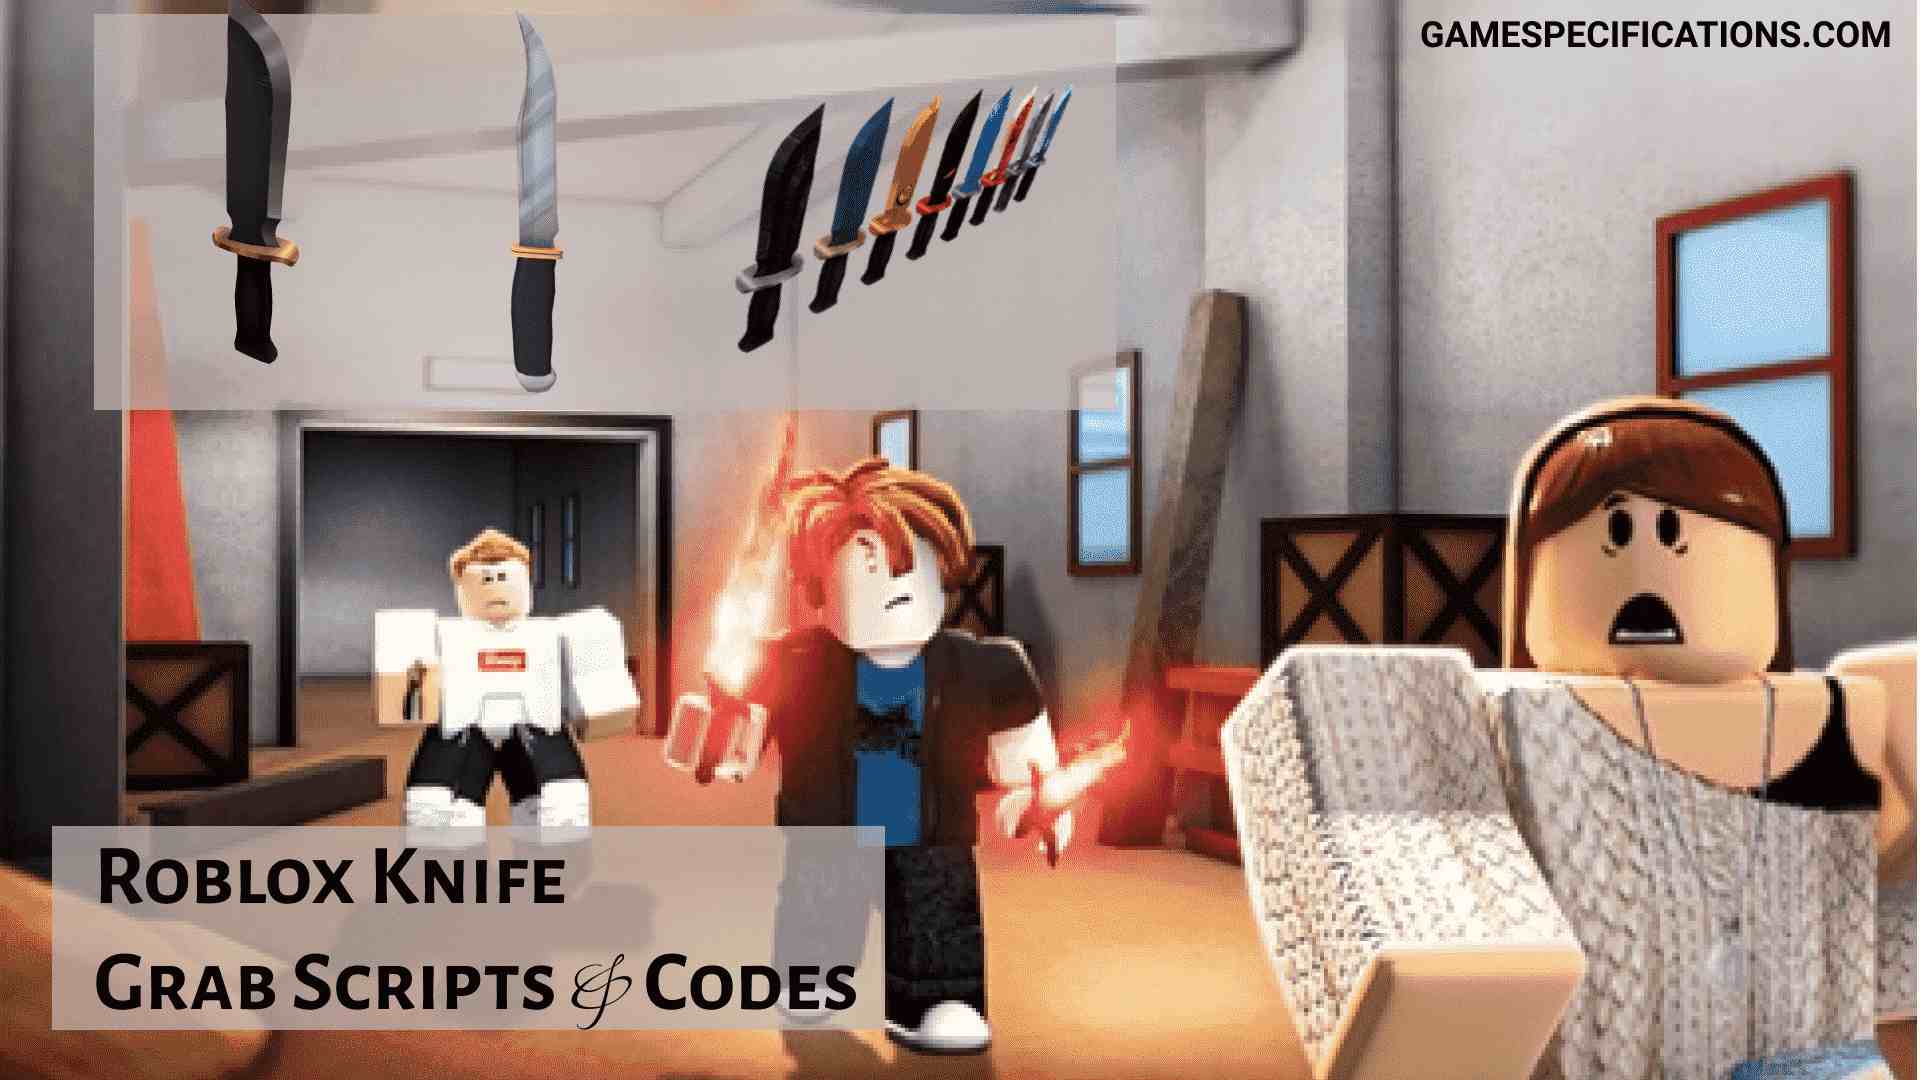 Roblox Knife Grab Script Codes 2021 Game Specifications - roblox knife sound